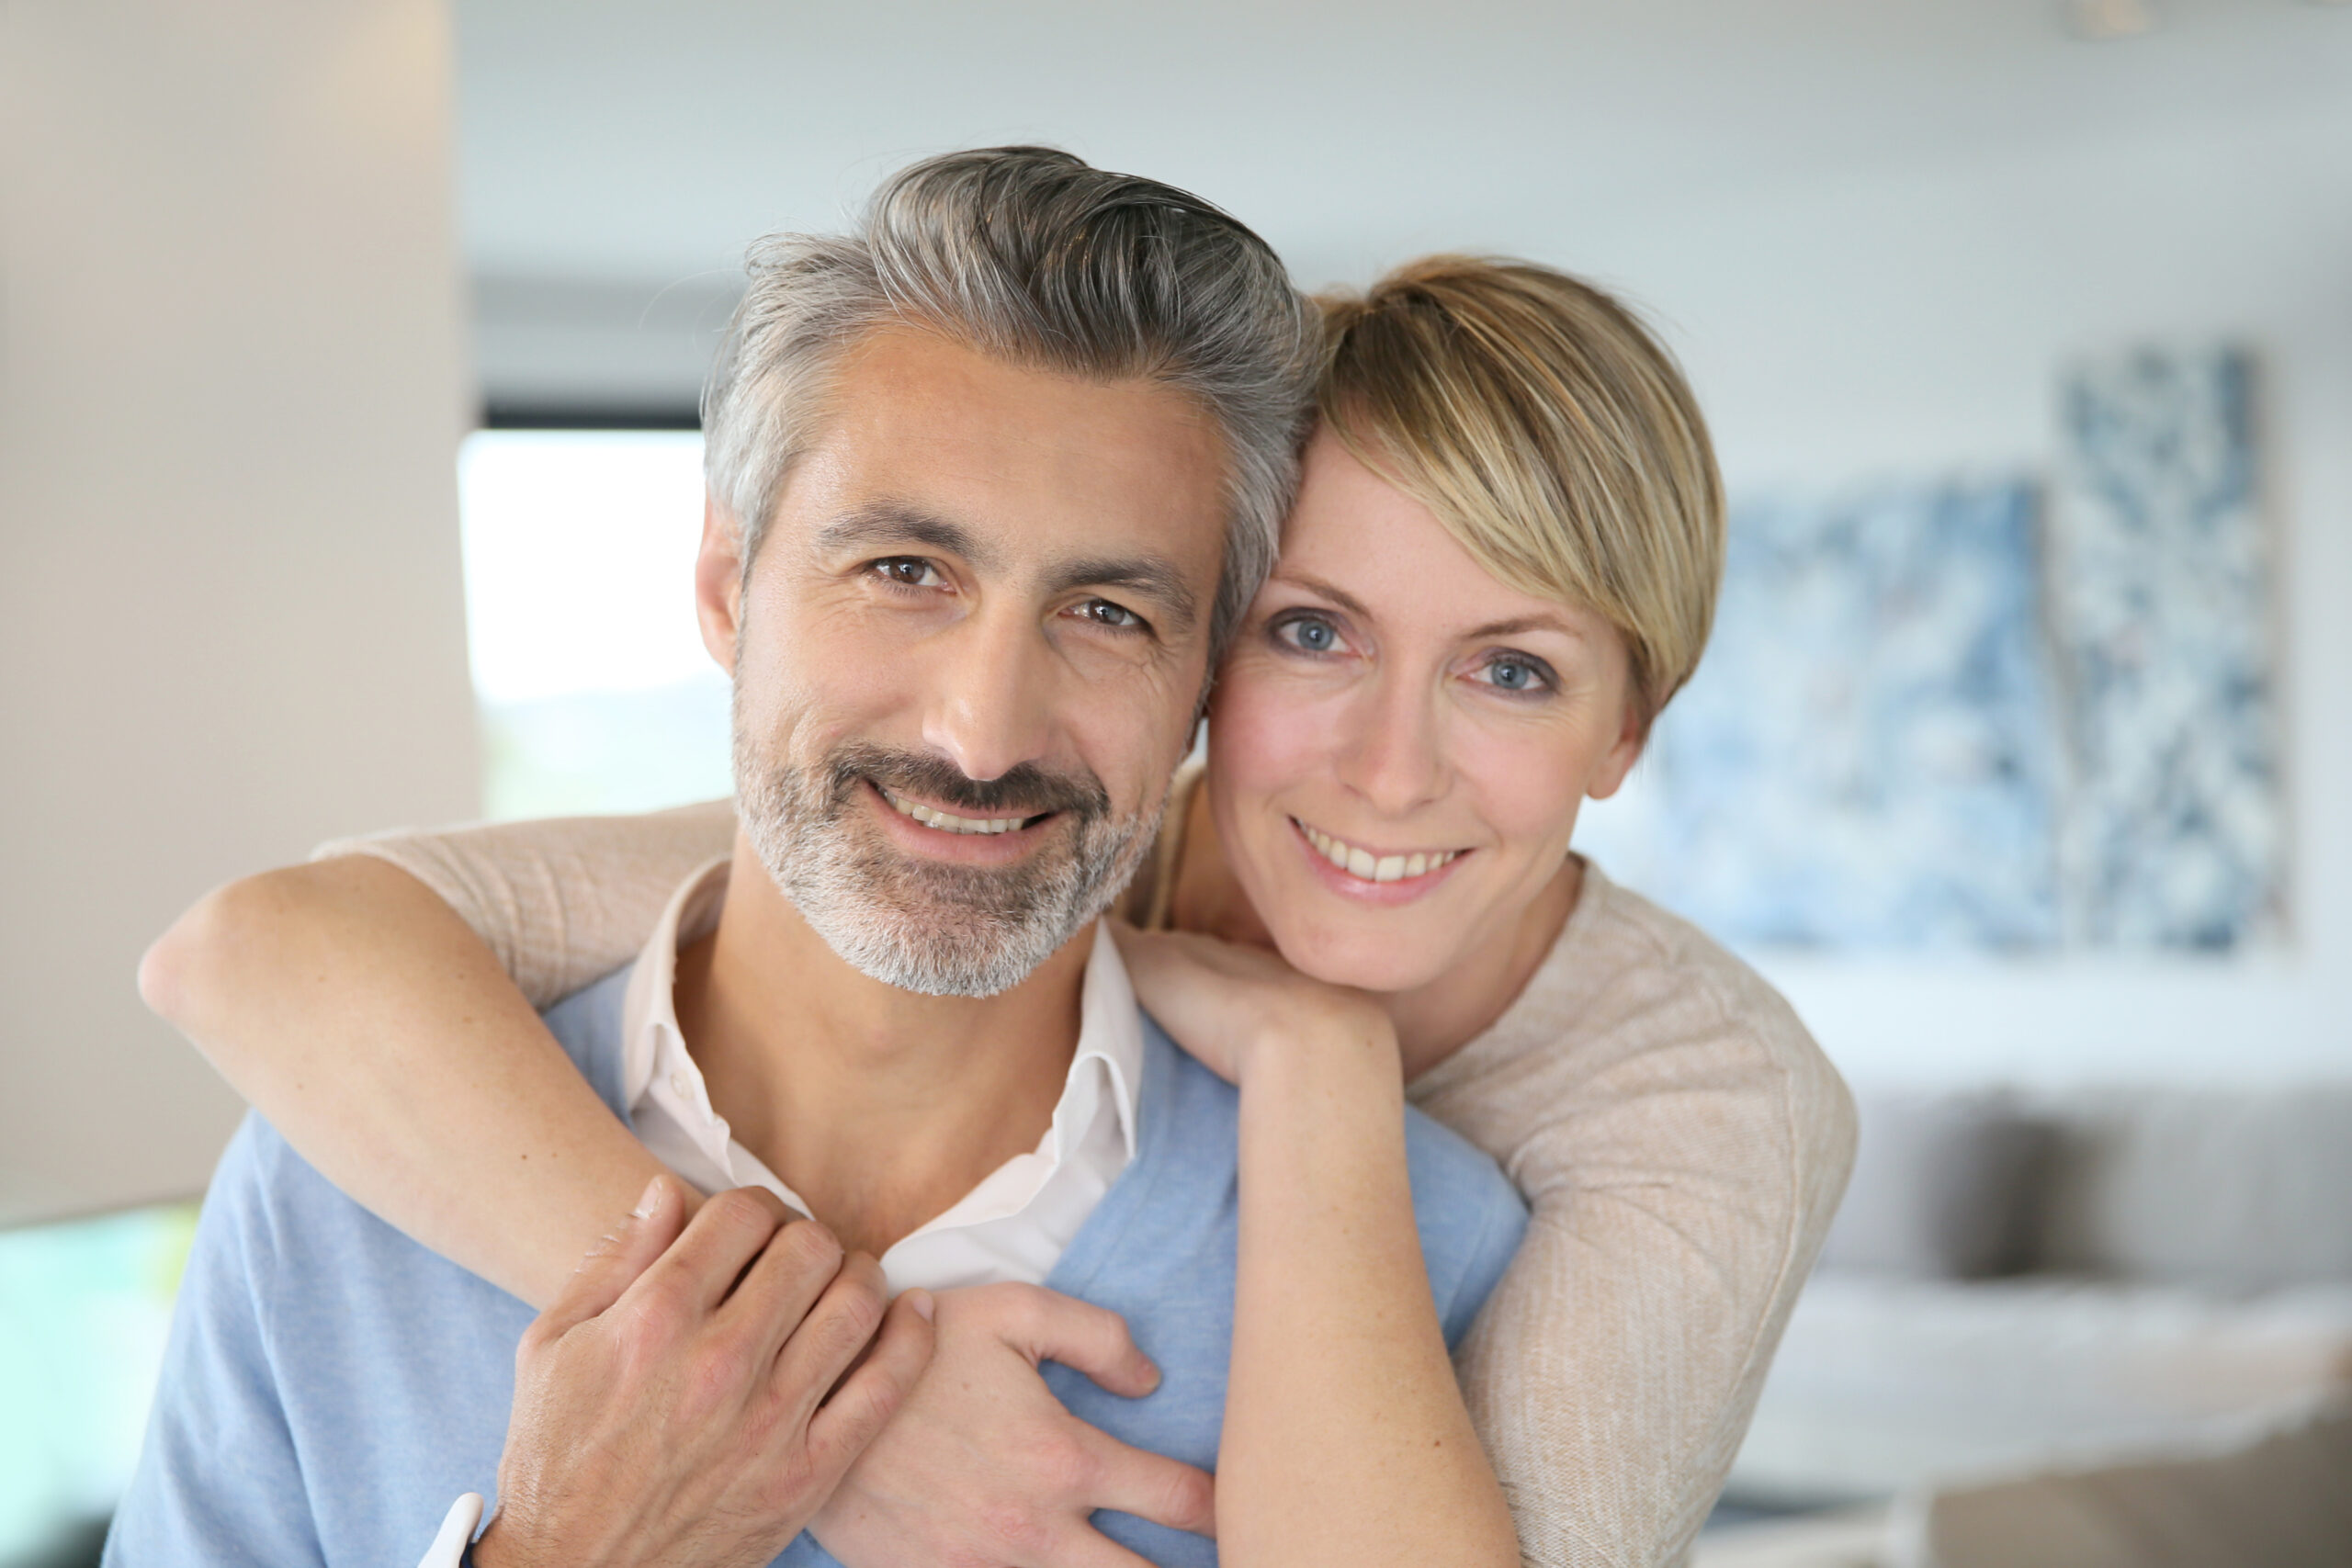 Middle aged couple who care for each other; man has prostate cancer and needs life insurance. They have found a solution.